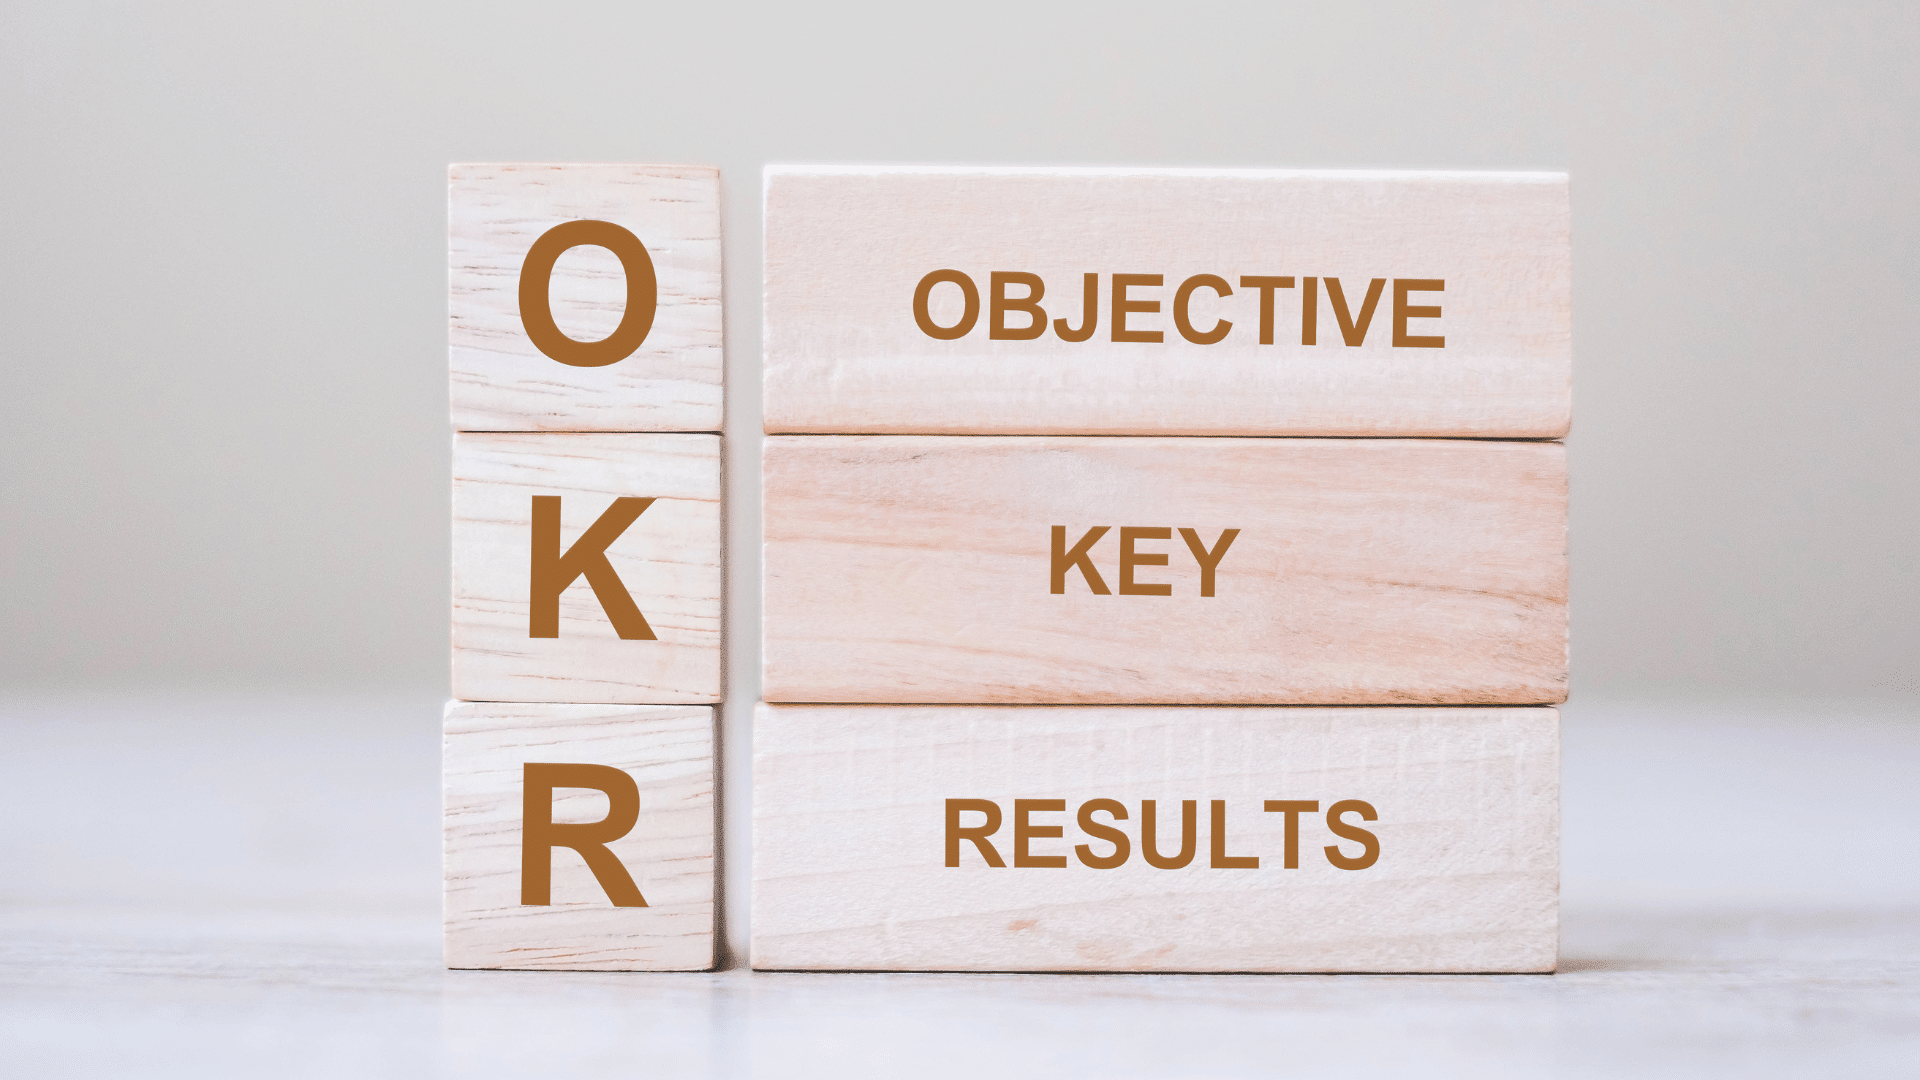 objectives and key results